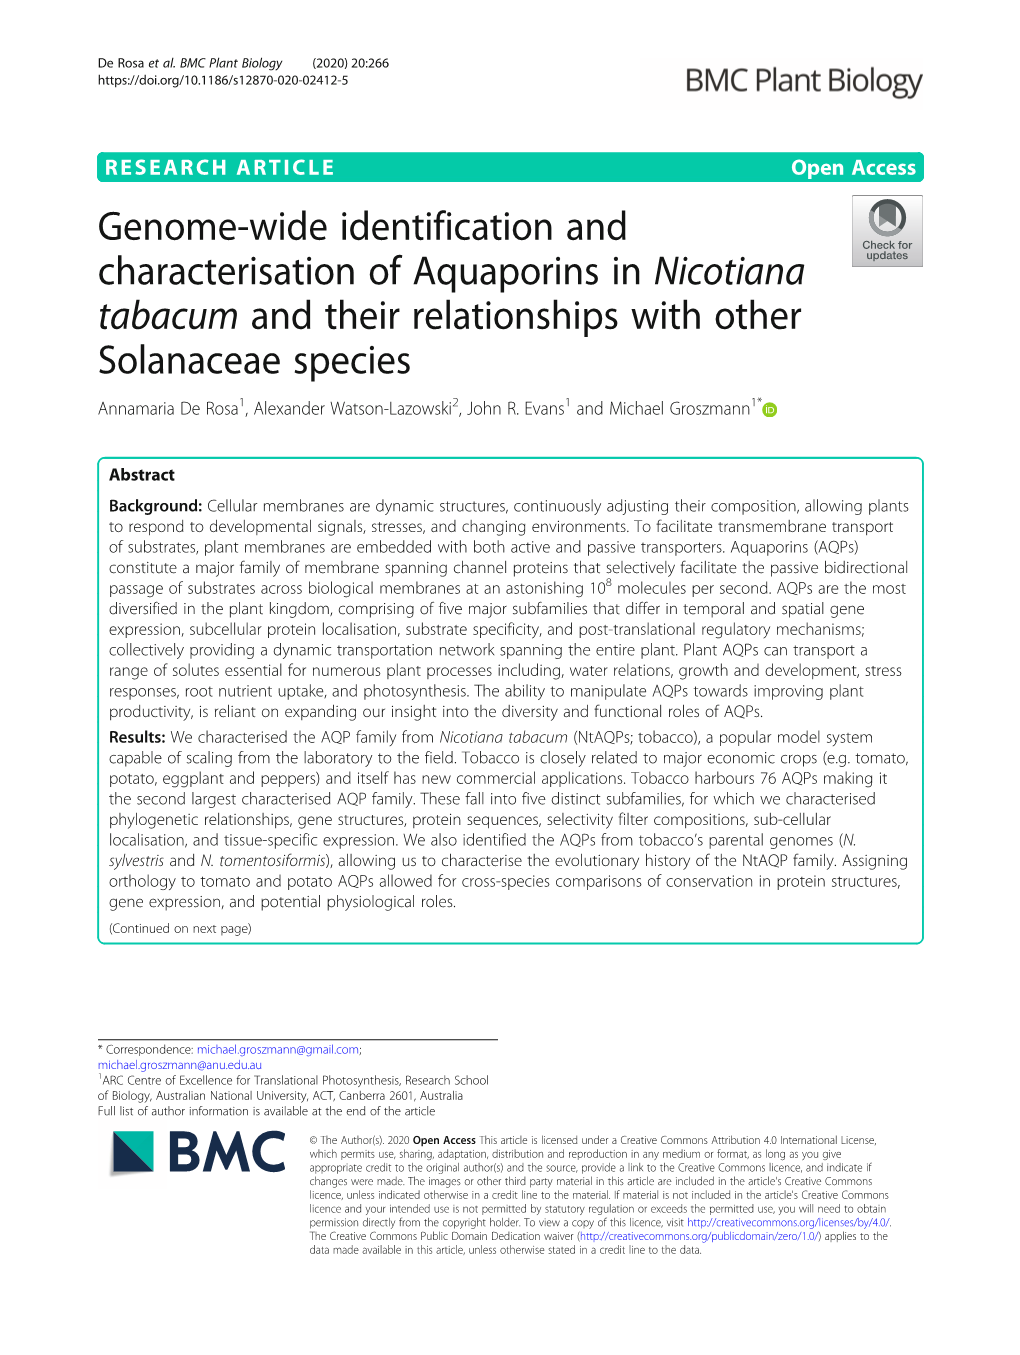 Genome-Wide Identification and Characterisation of Aquaporins in Nicotiana Tabacum and Their Relationships with Other Solanaceae